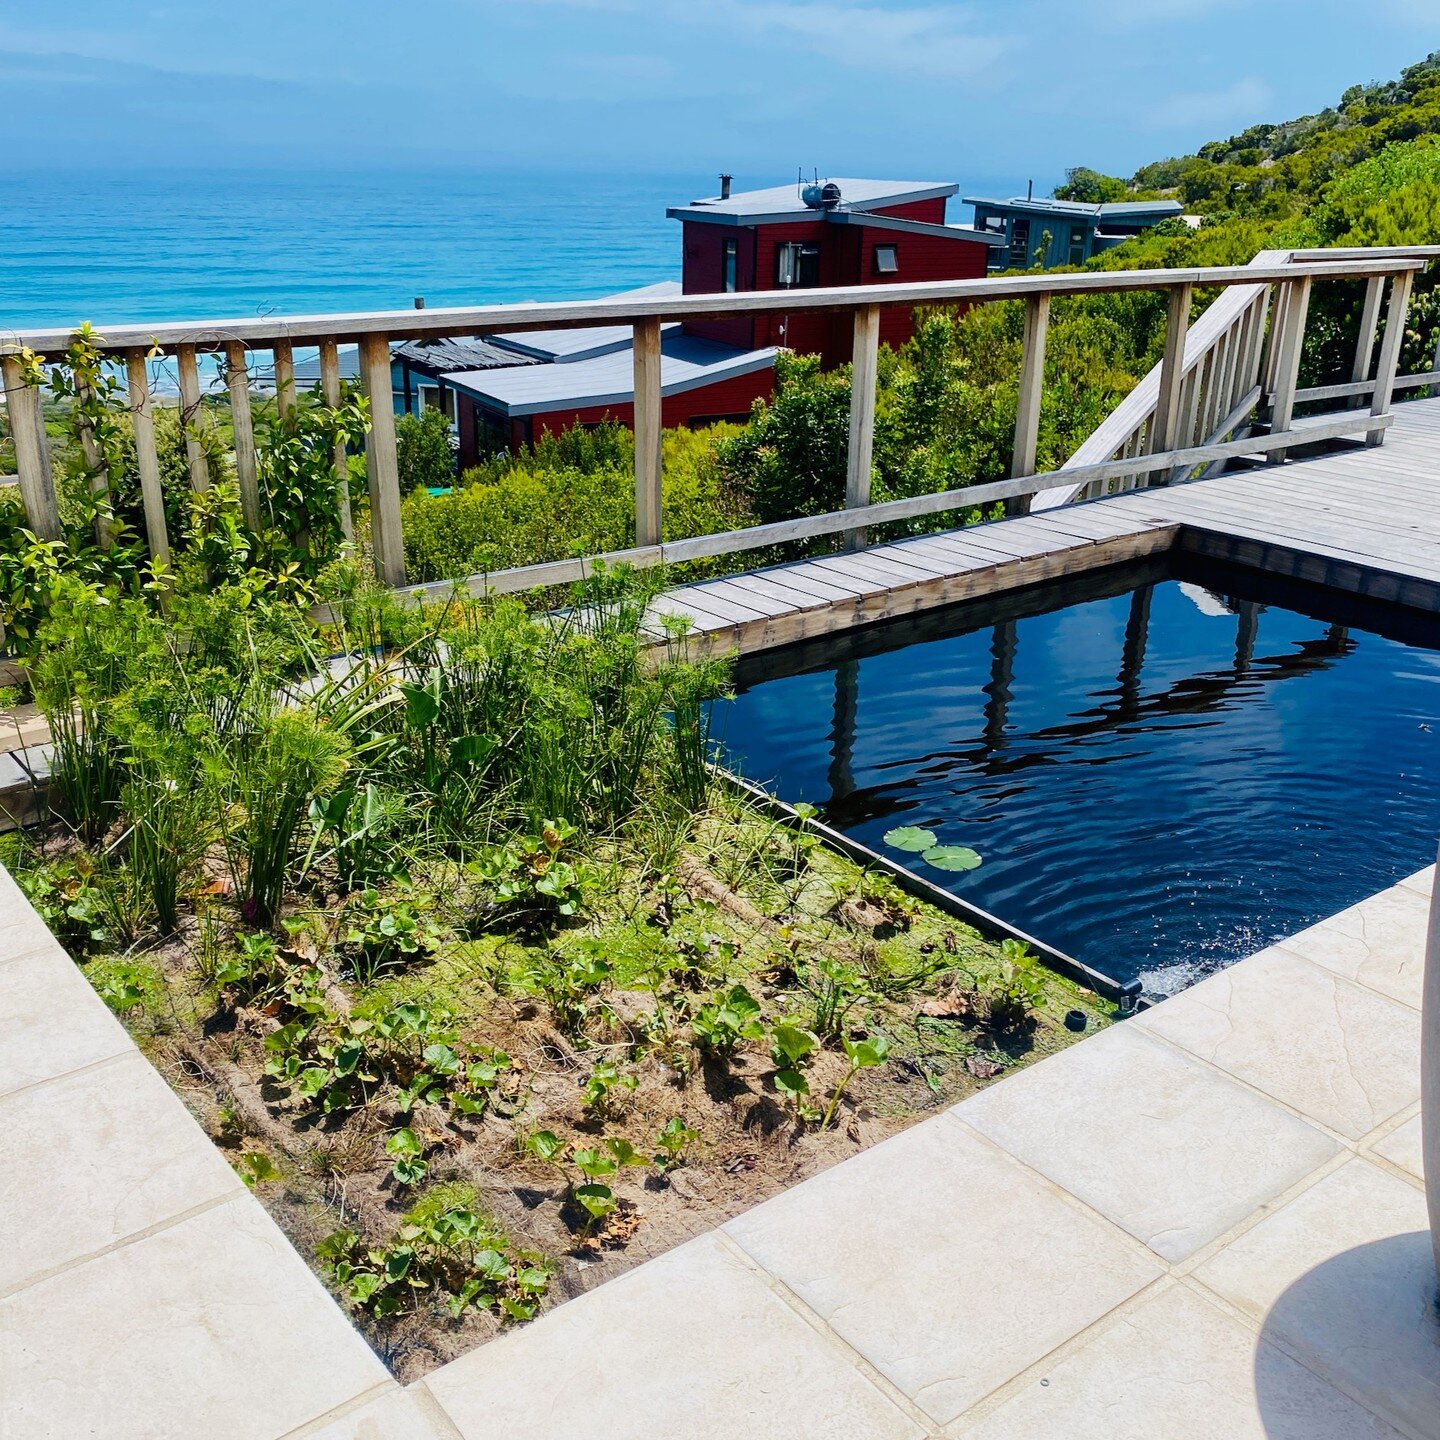 This is a small plunge pool that we resurrected for a client in Scarborough, Cape Town. This is a floating wetland system and is only a few months old, so by next season, the planted structure will be totally populated with plants. Great to see how i